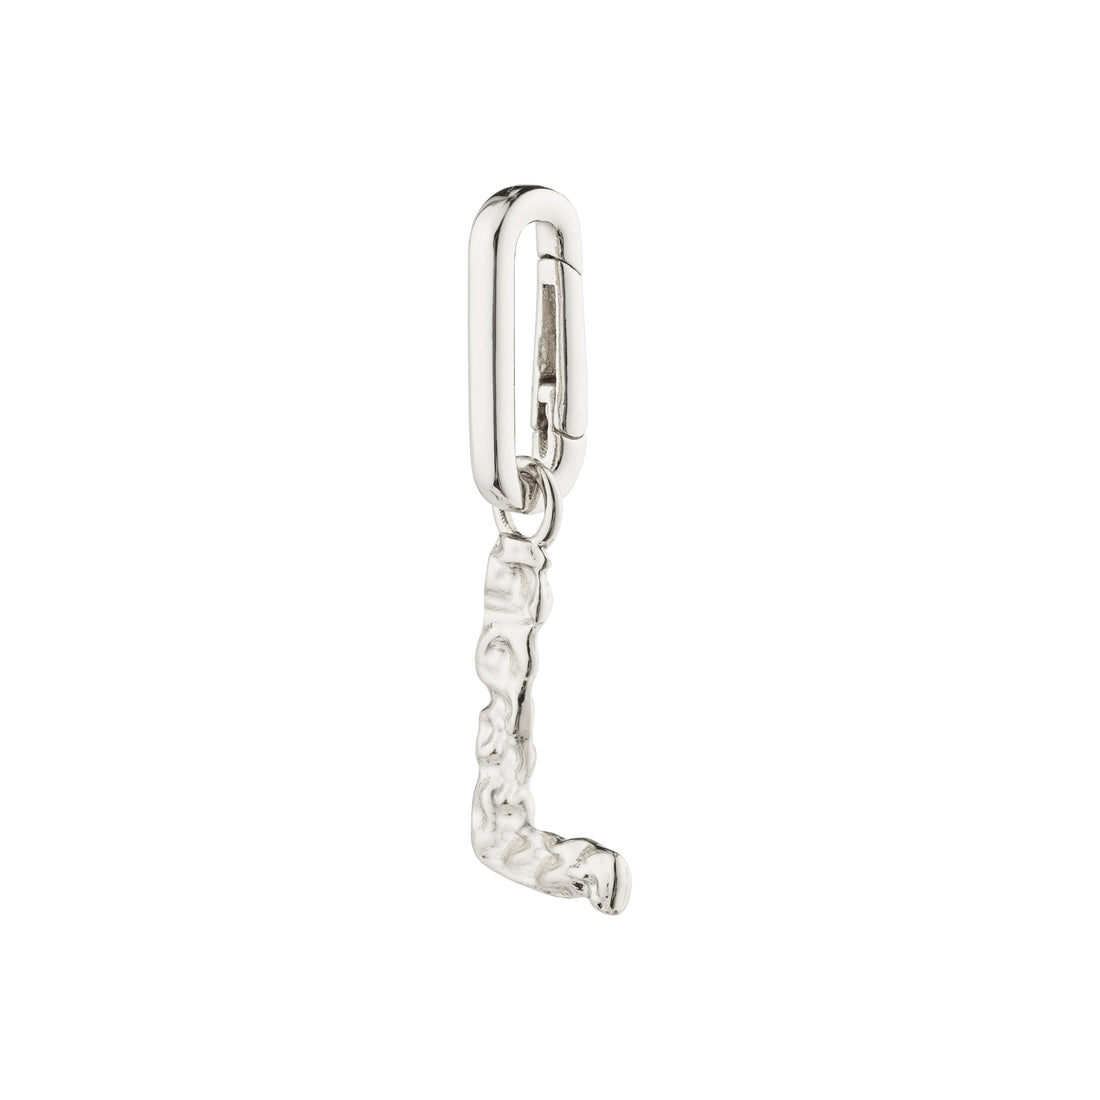 CHARM recycled pendant L, silver-plated